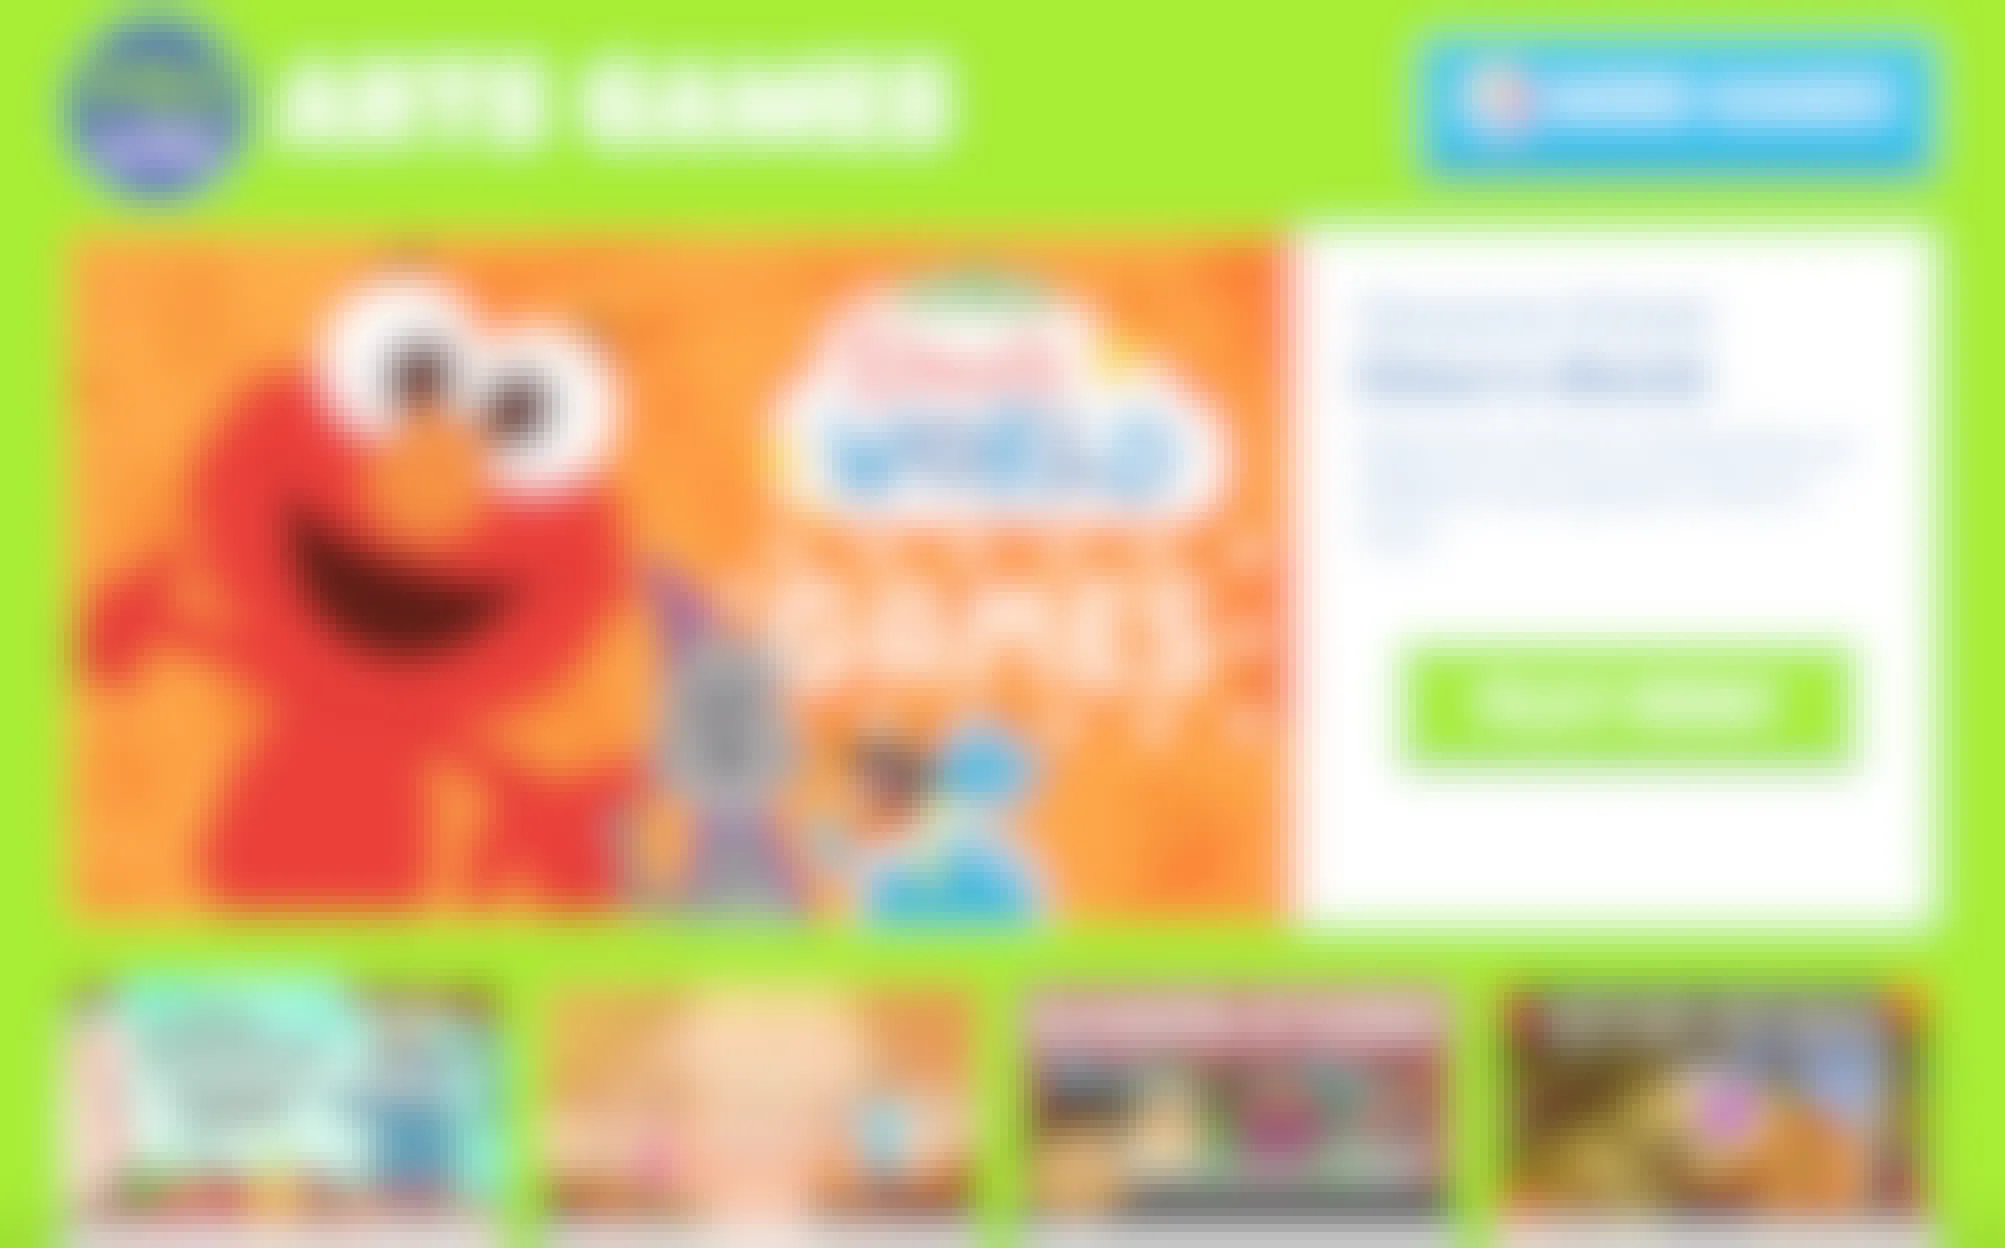 A screenshot of the PBS.org website for online art games featuring Elmo's World Games.